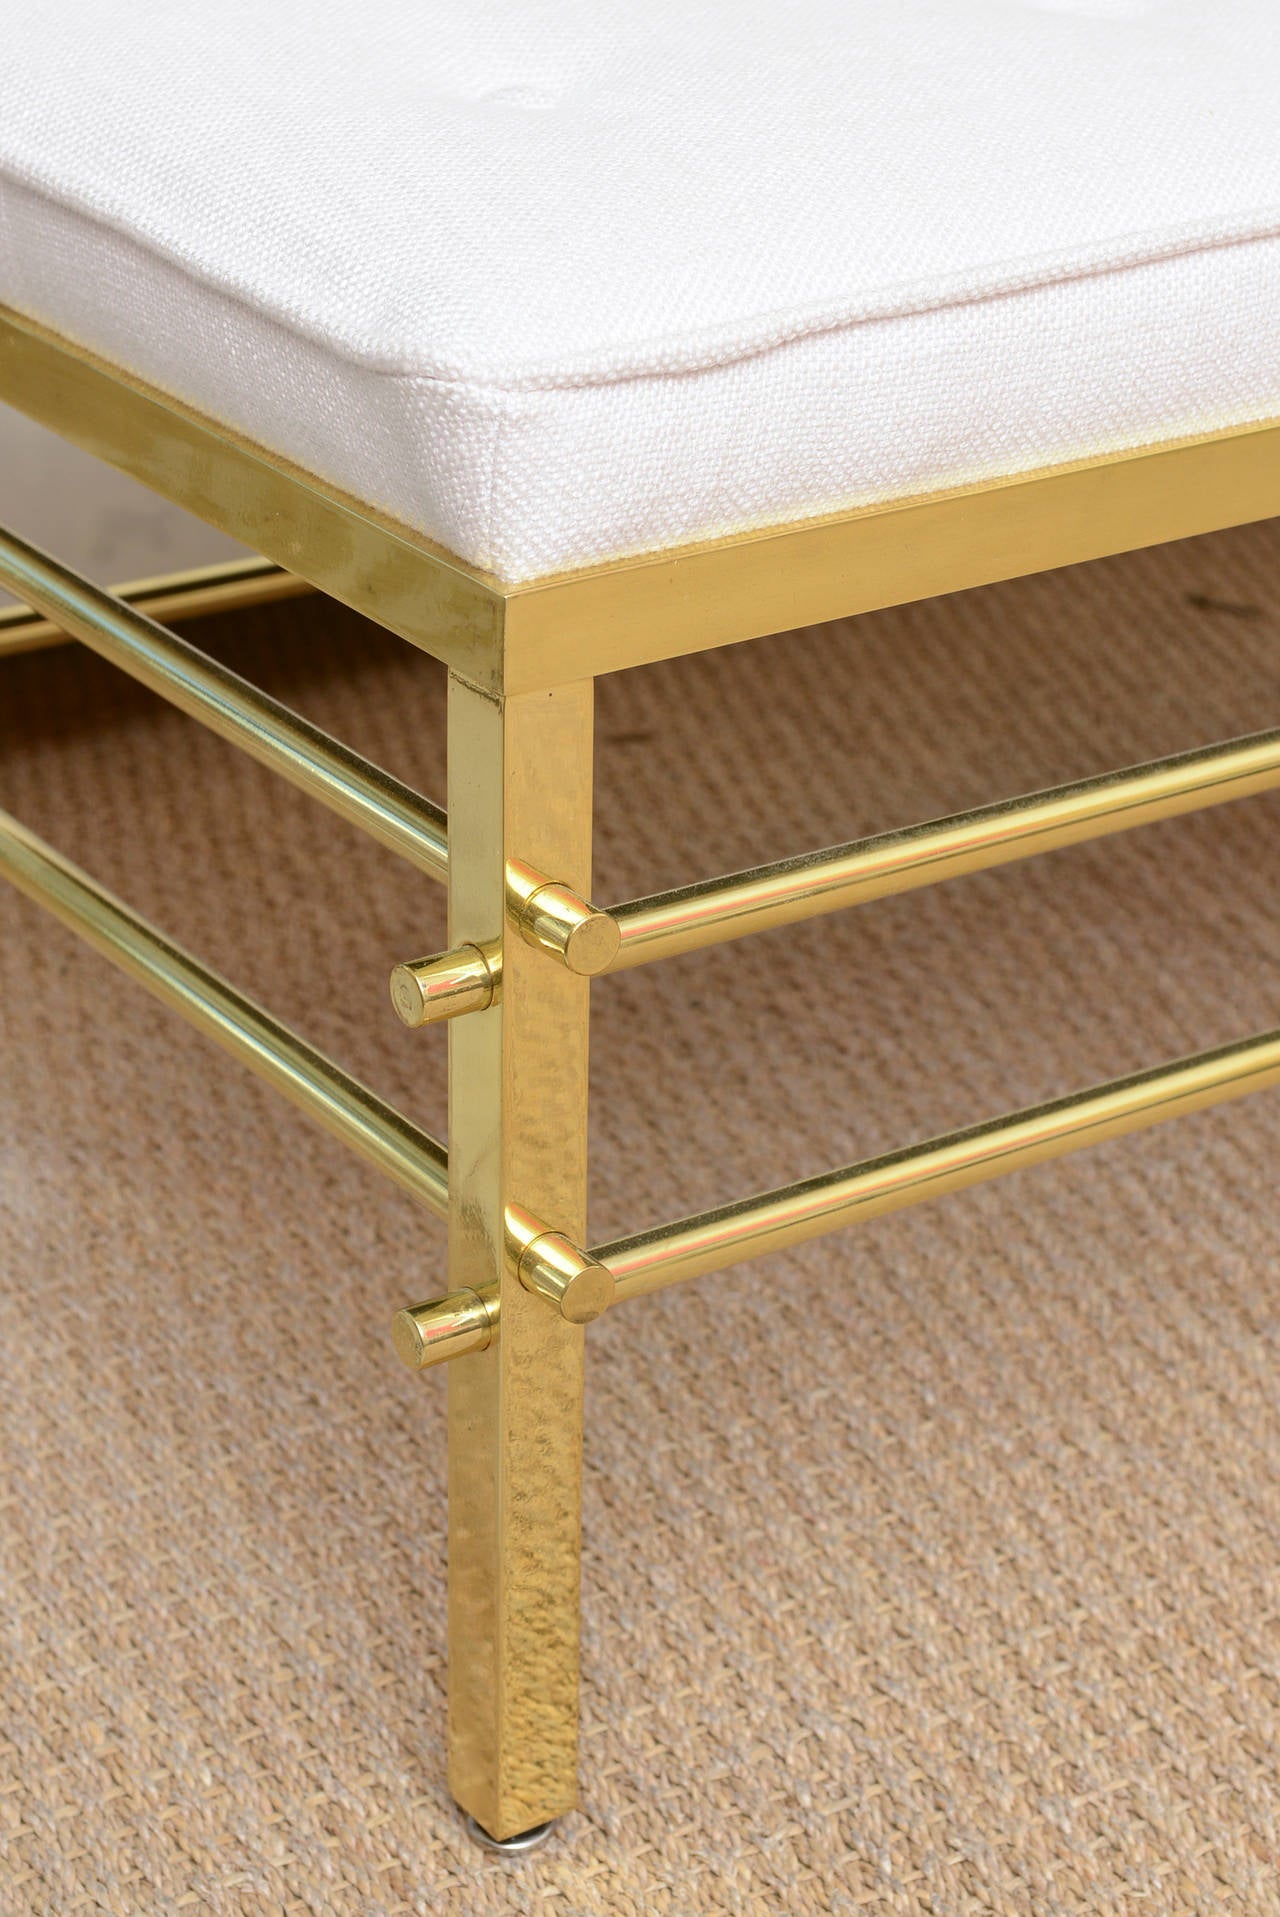 Mid-20th Century Tommi Parzinger Brass and Upholstered Mid-Century Modern Bench